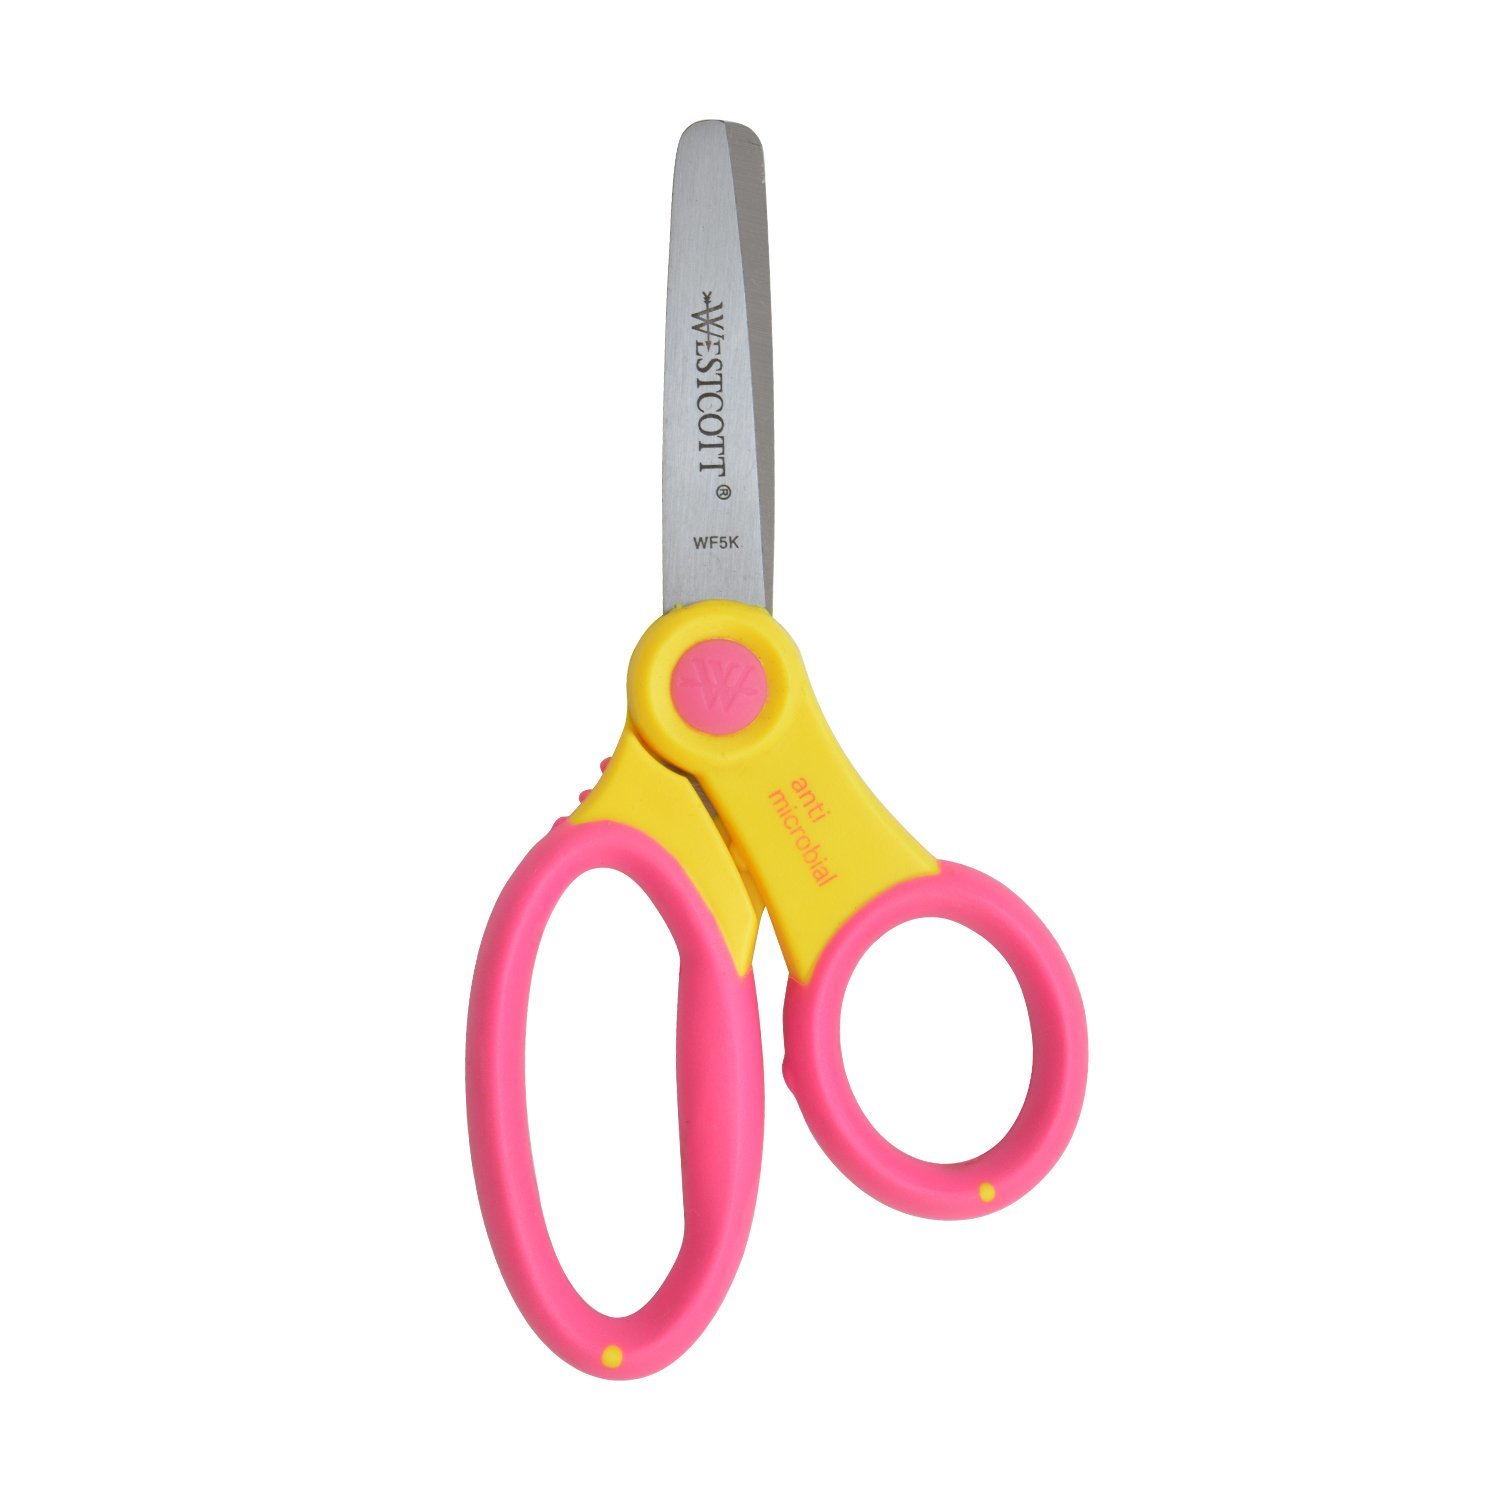  Fiskars 7 Student Scissors for Kids 12-14 - Scissors for  School or Crafting - Back to School Supplies - Blue : Office Products